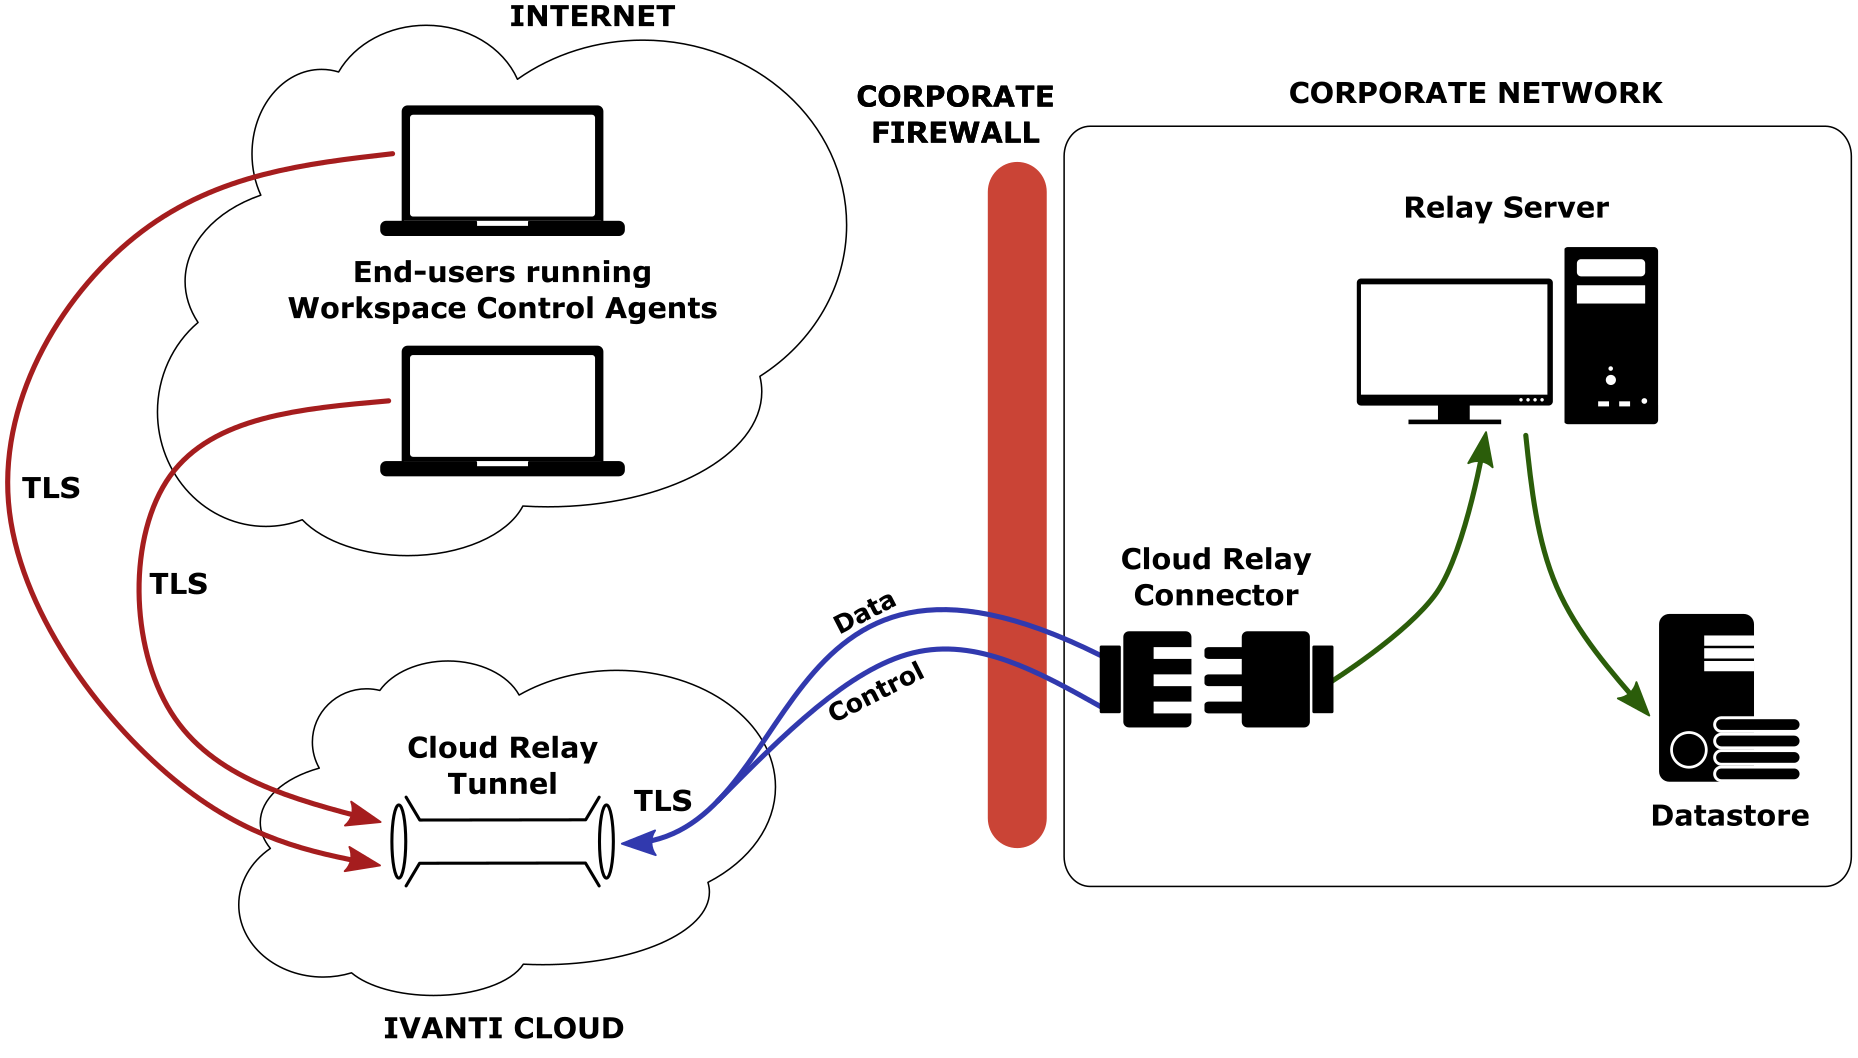 ivanti cloud, corporate firewall, and corporate network graphic 